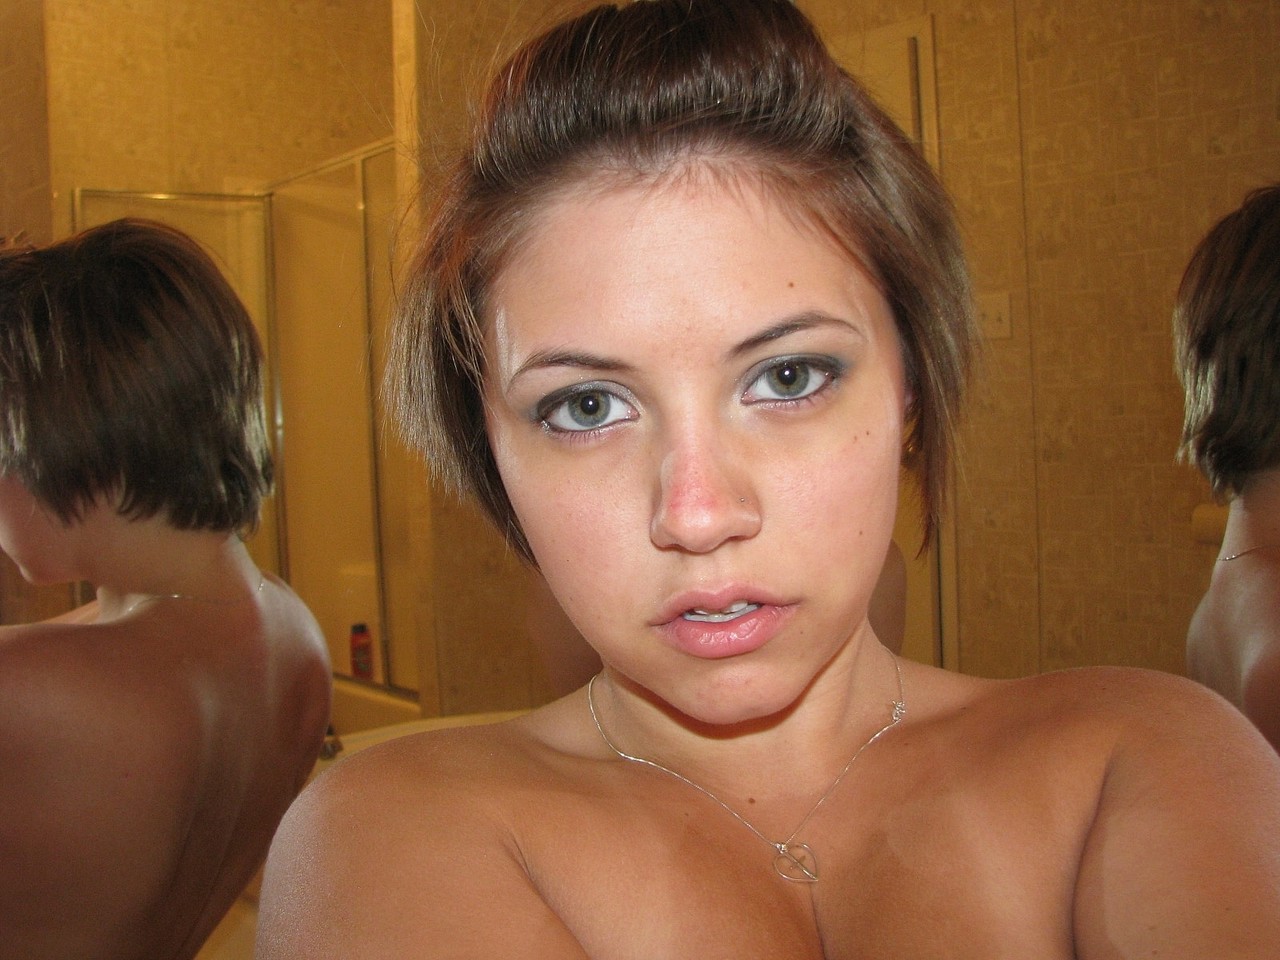 Sexy teen amateur shows off her big breasts while taking nude photos 色情照片 #427315190 | Teen Girl Photos Pics, Amateur, 手机色情